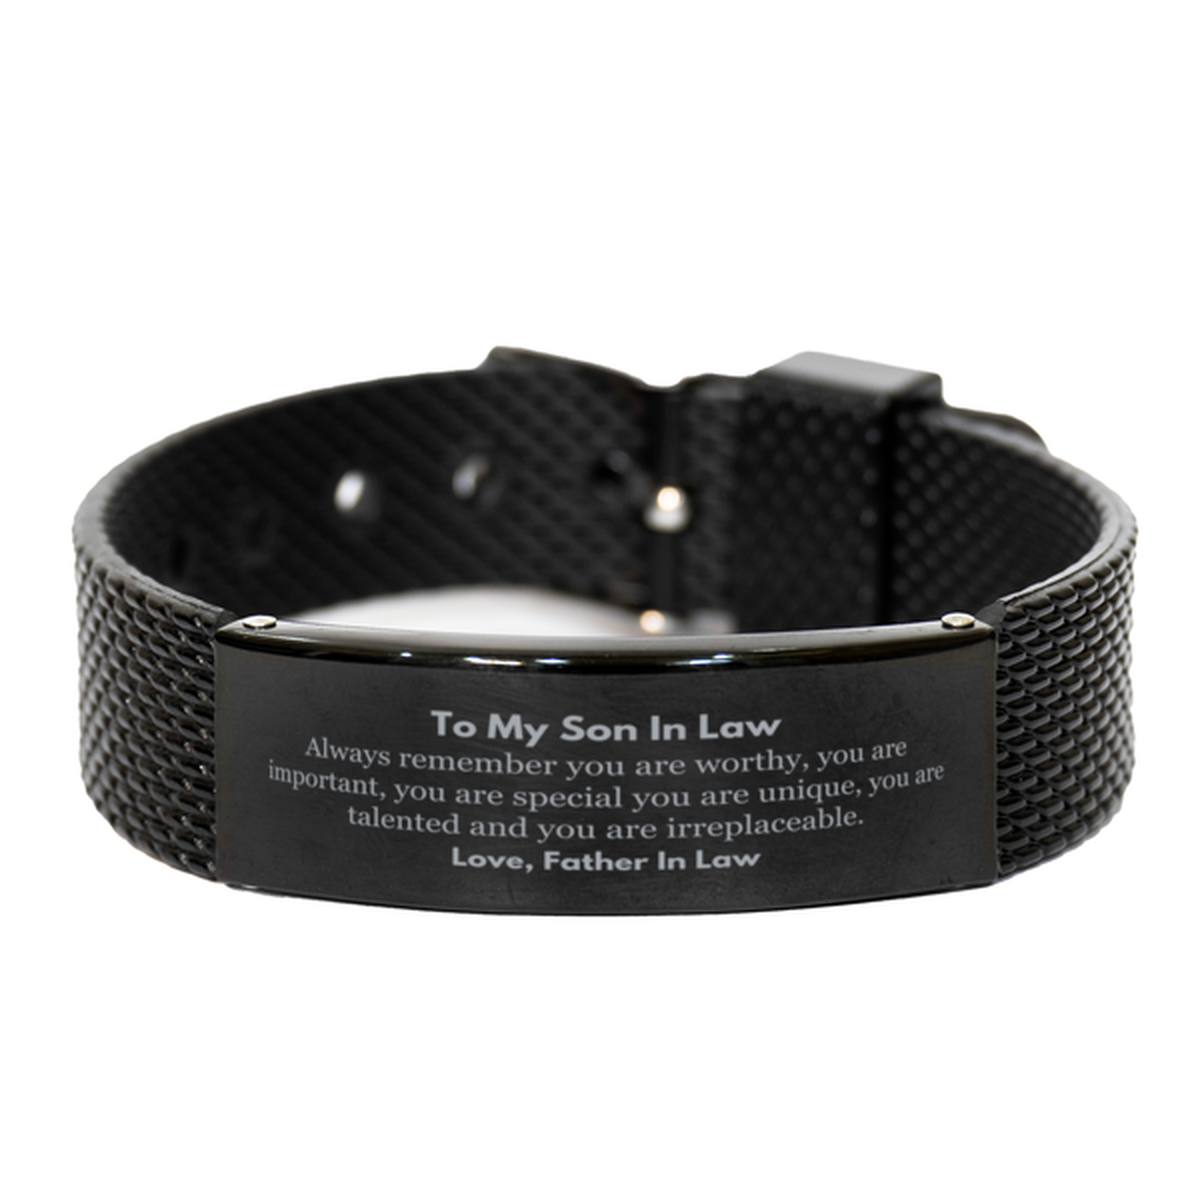 Son In Law Birthday Gifts from Father In Law, Inspirational Black Shark Mesh Bracelet for Son In Law Christmas Graduation Gifts for Son In Law Always remember you are worthy, you are important. Love, Father In Law